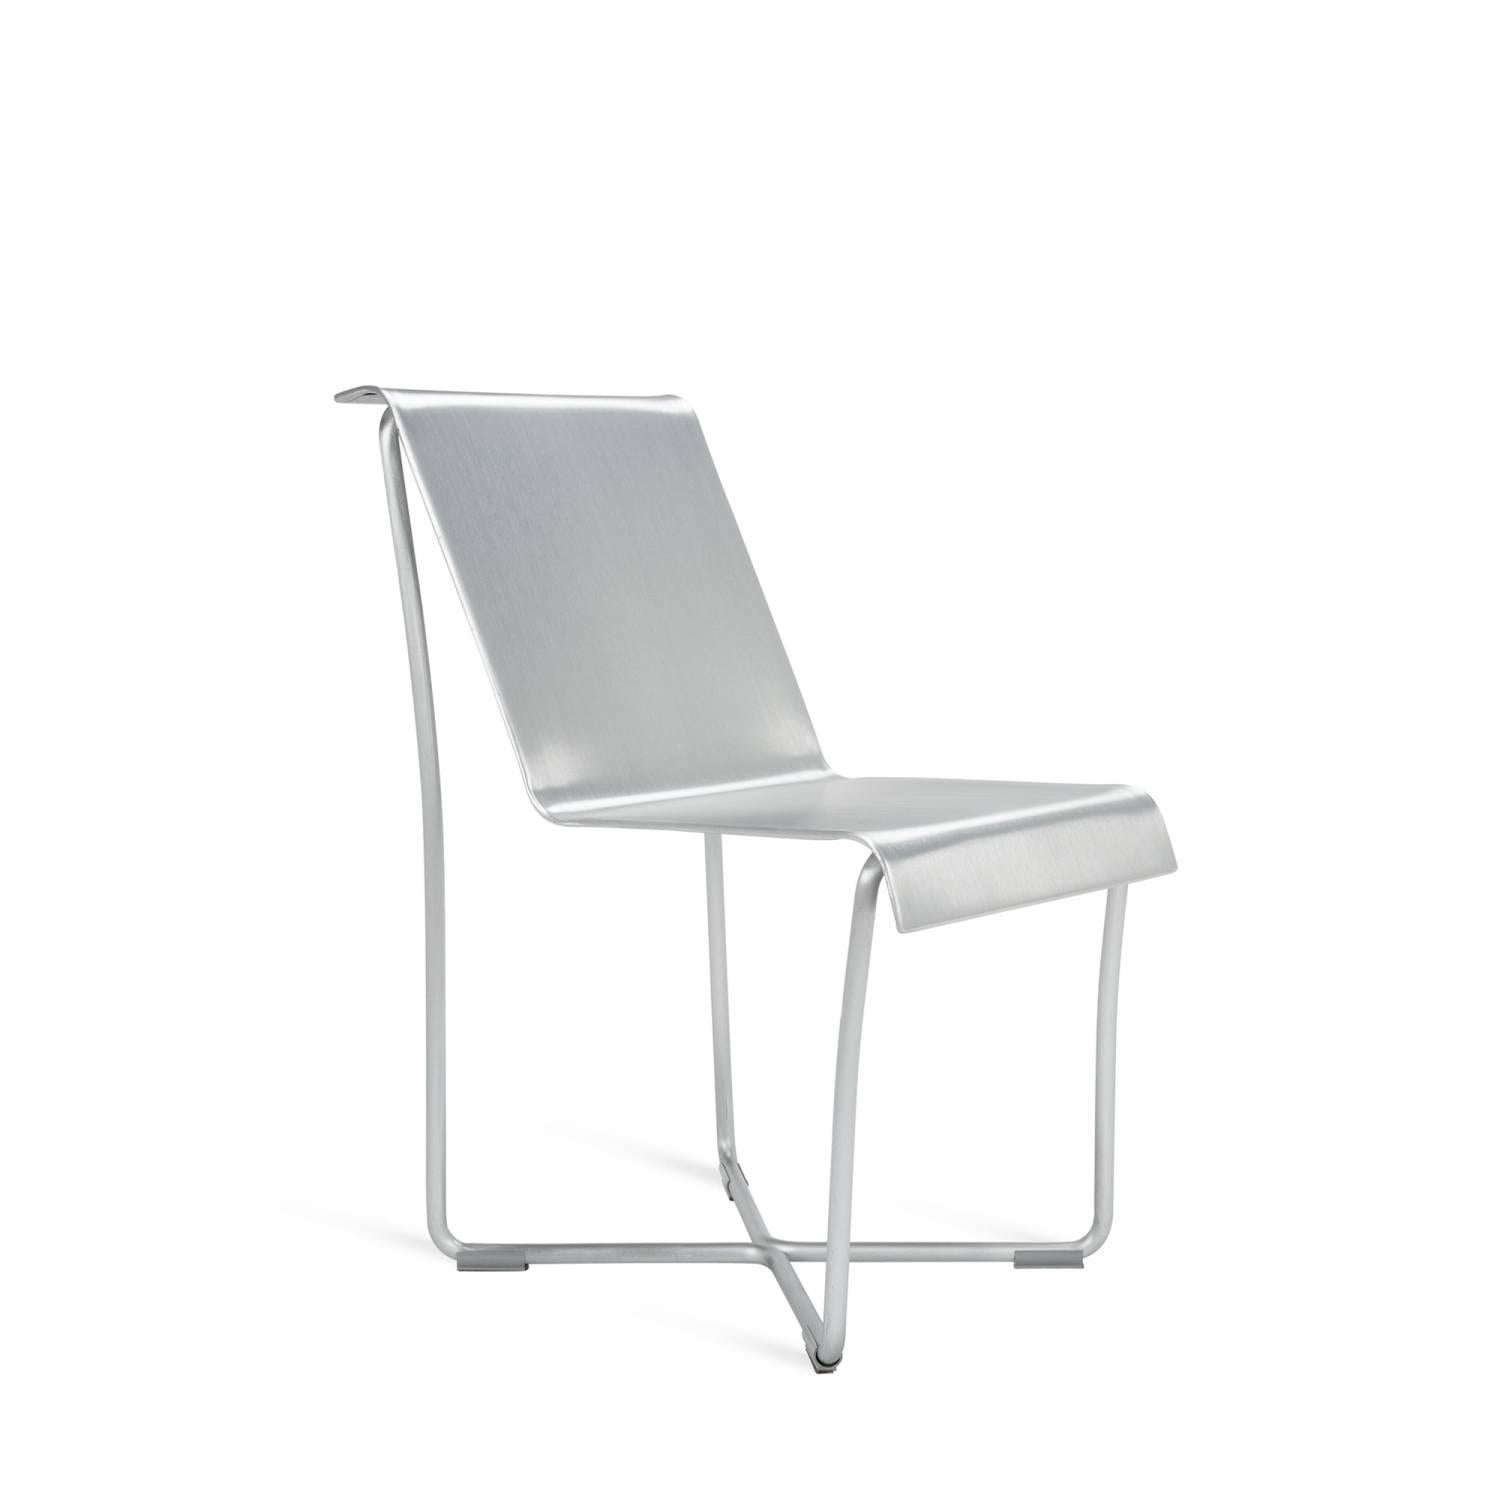 Frank Gehry and Emeco teamed up on a new kind of lightweight chair that beautifully expressed the elastic quality of aluminum at only 4.09kg. This chair conforms to the body as it gently rocks back and forth. The ingenious construction features a